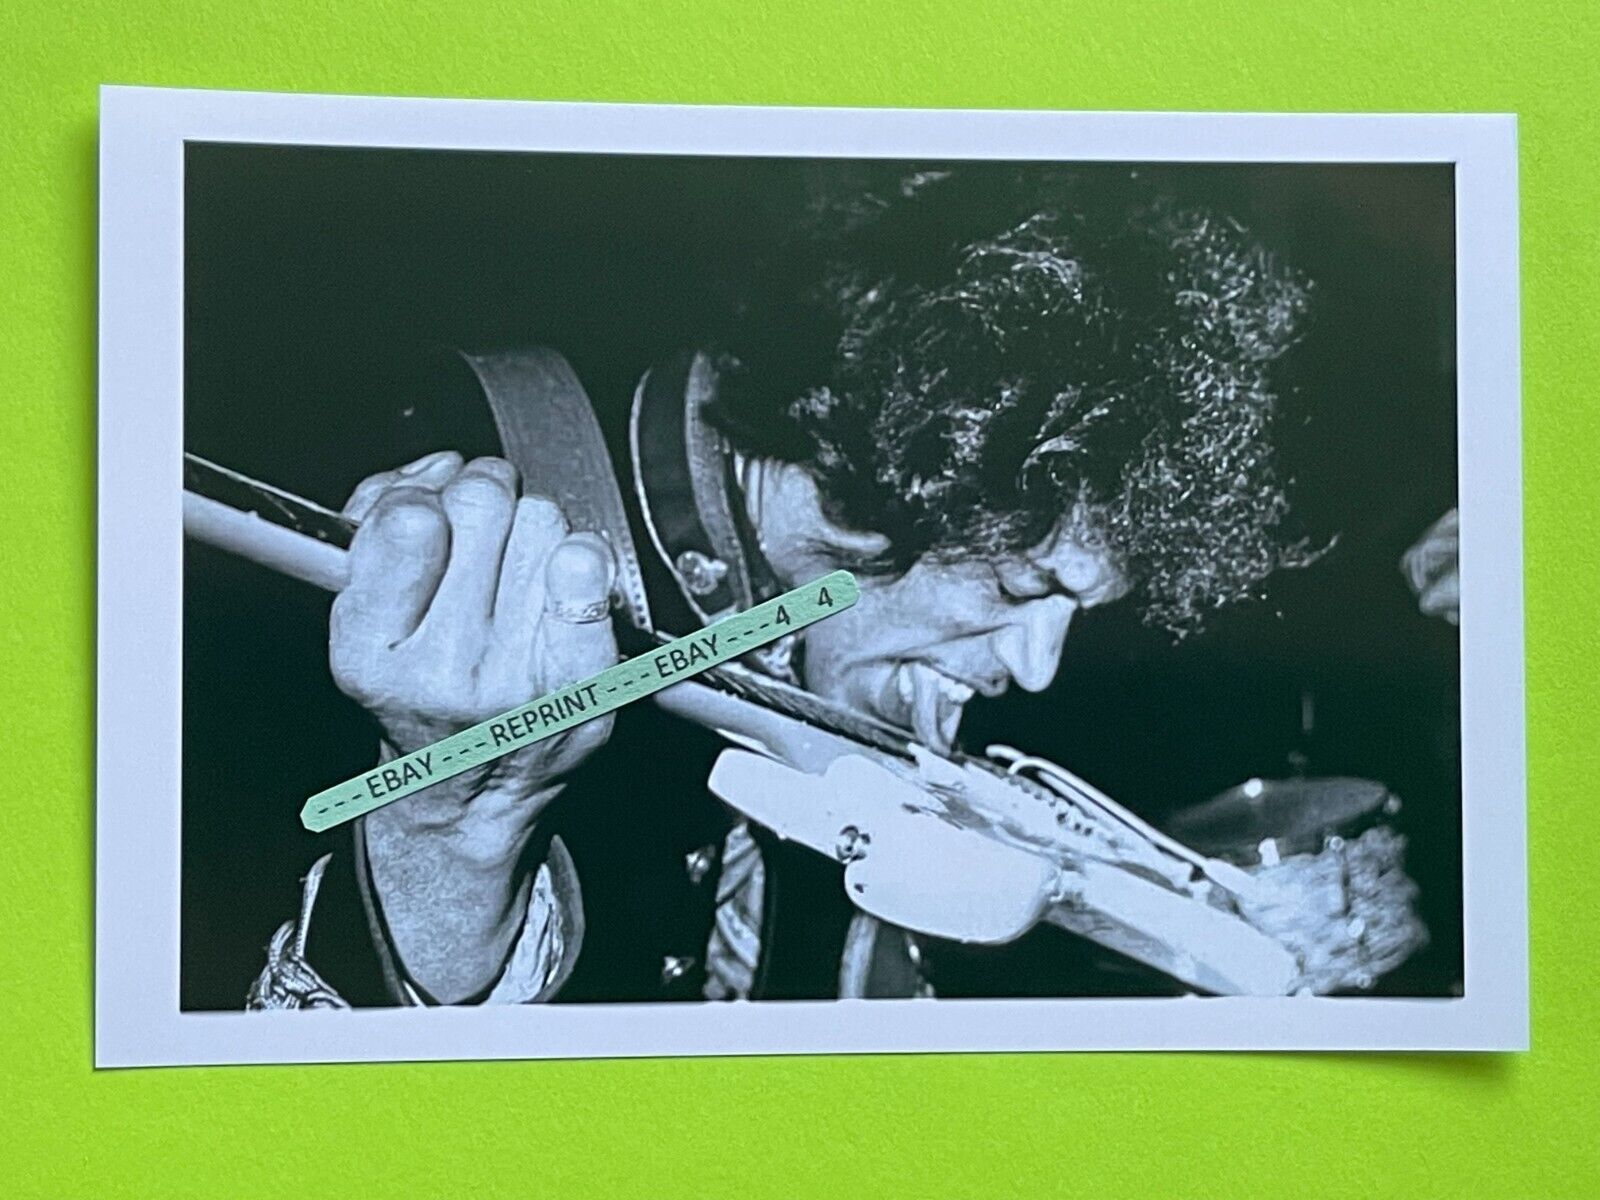 Found PHOTO of The JIMI HENDRIX Experience Old Guitar Legend from the 60's